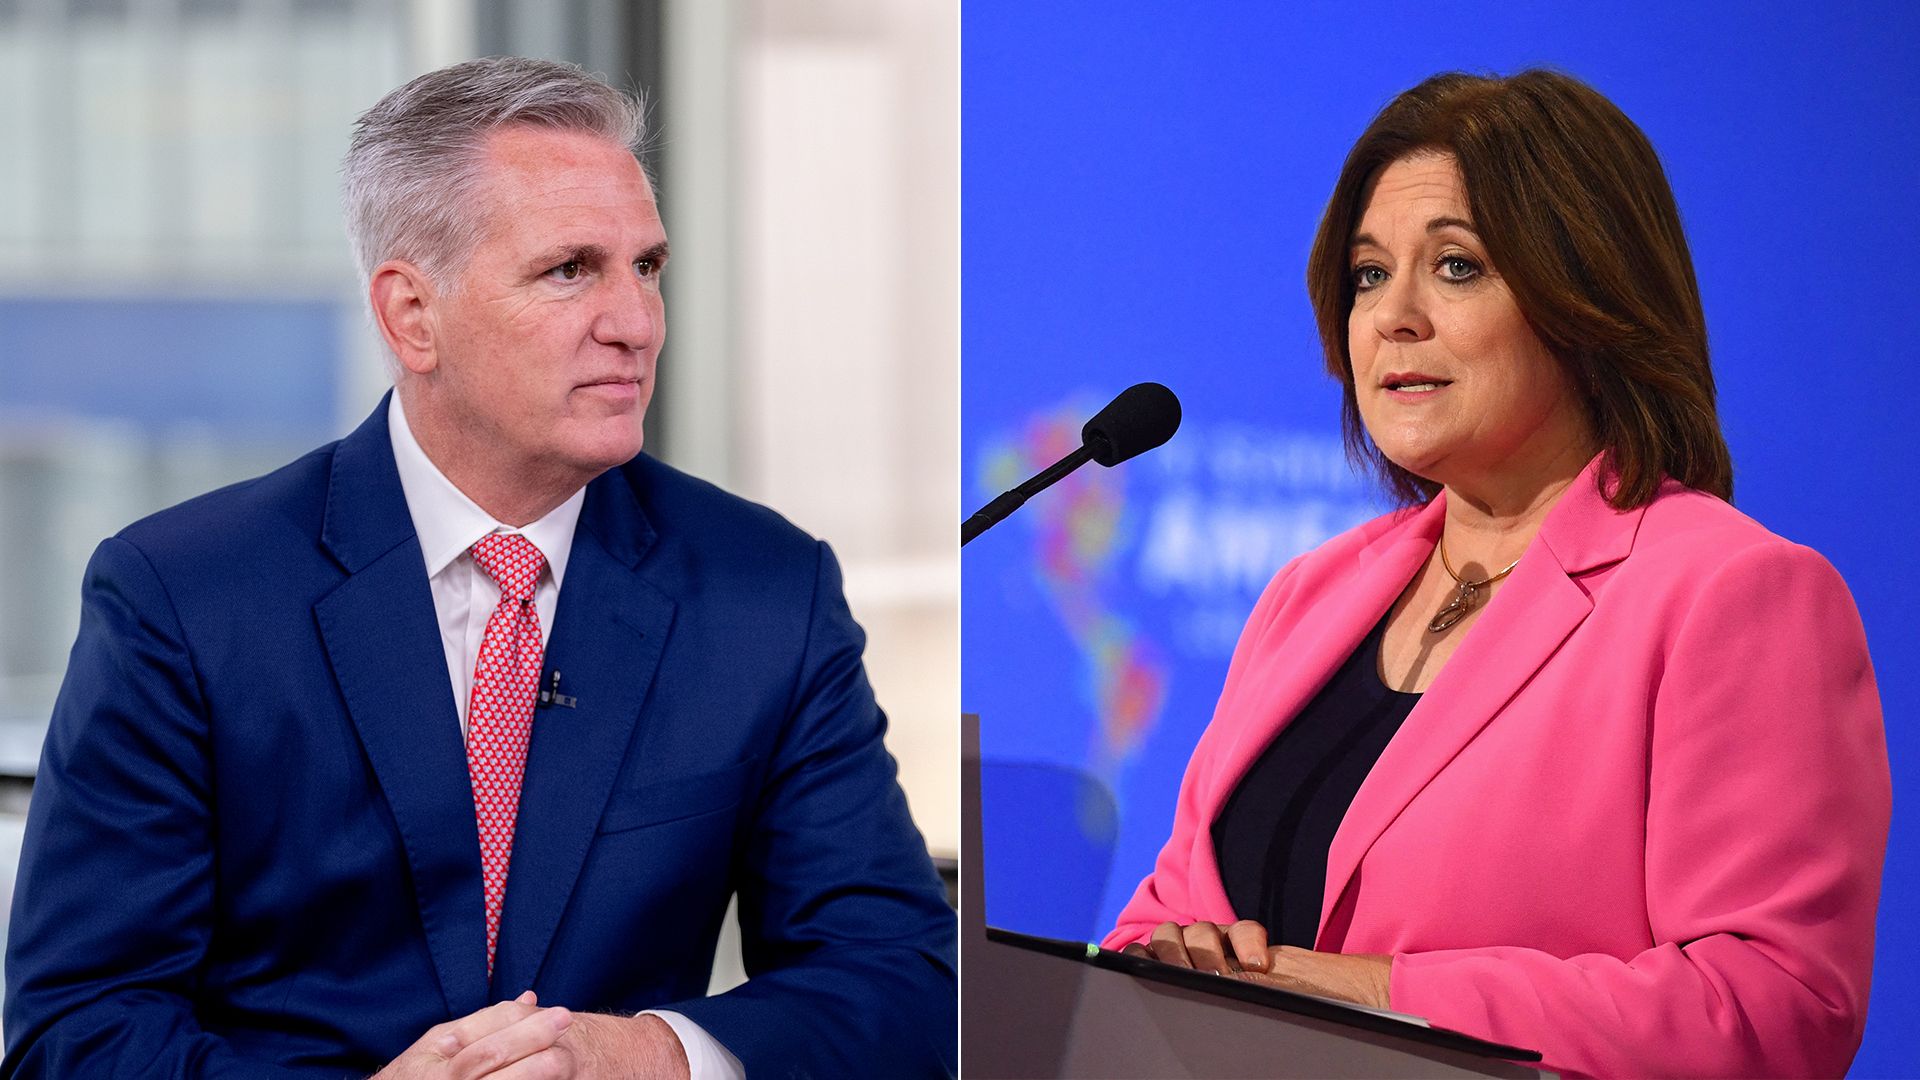 Kevin McCarthy is seated in blue seat on the left; Suzanne Clark is seated in a bright pinkish suit on the right.